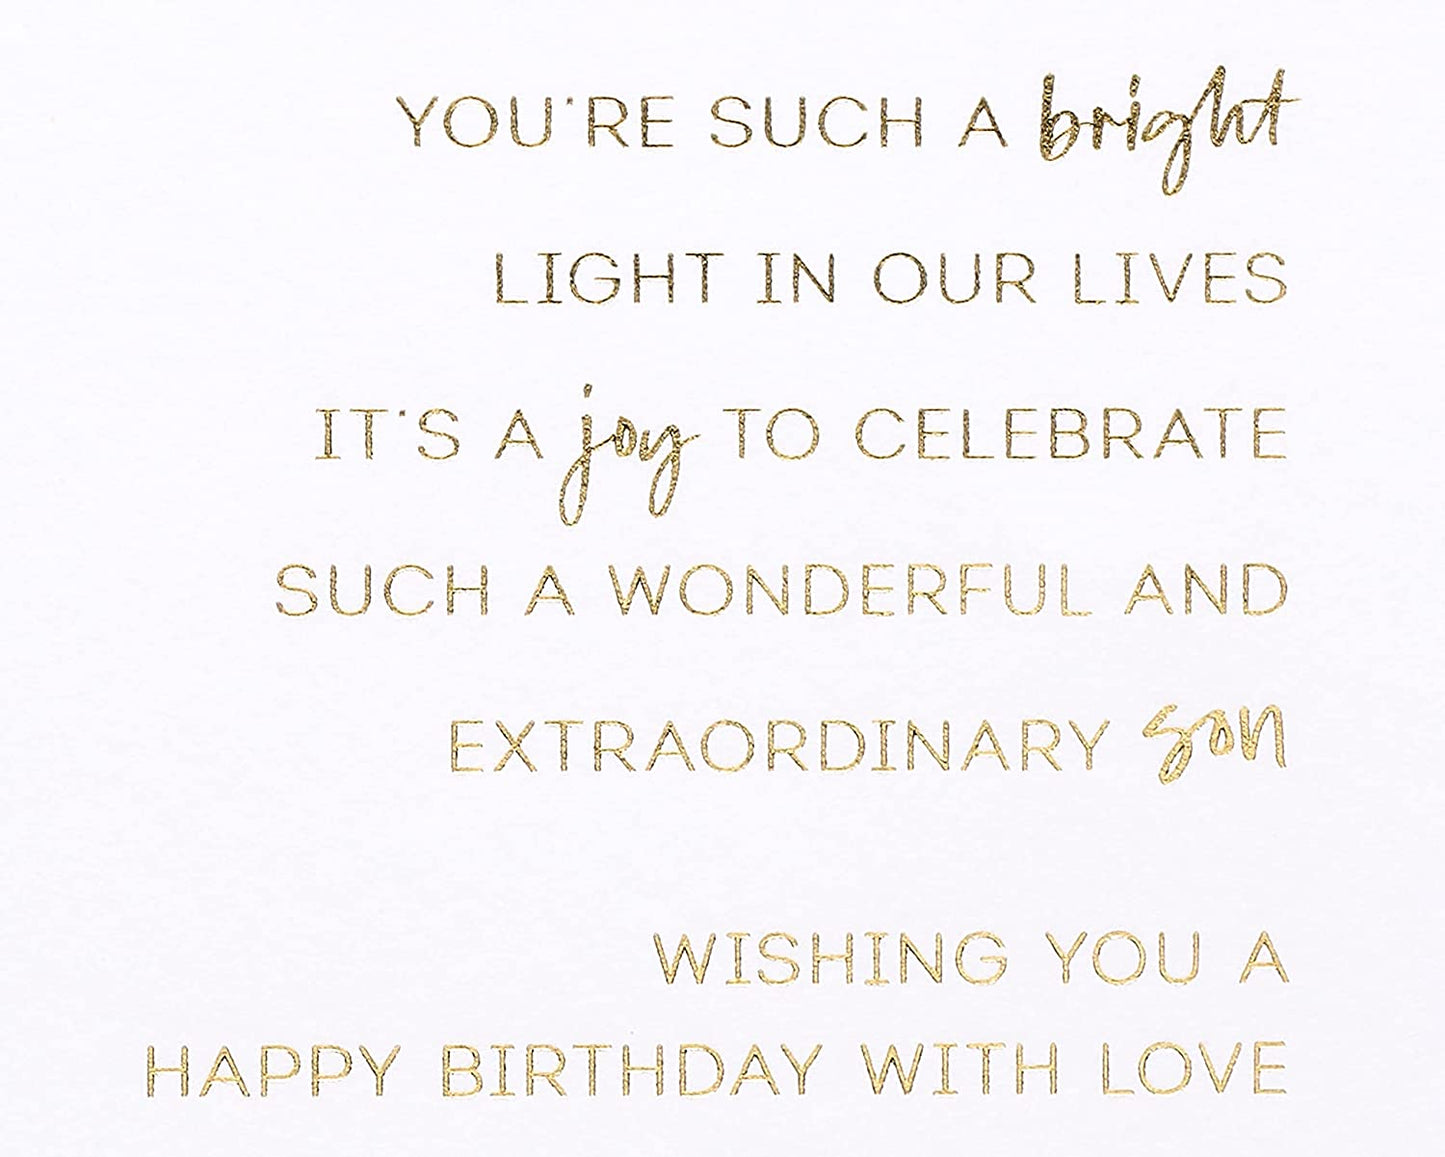 Papyrus Birthday Card for Son (Bright Light In Our Lives)